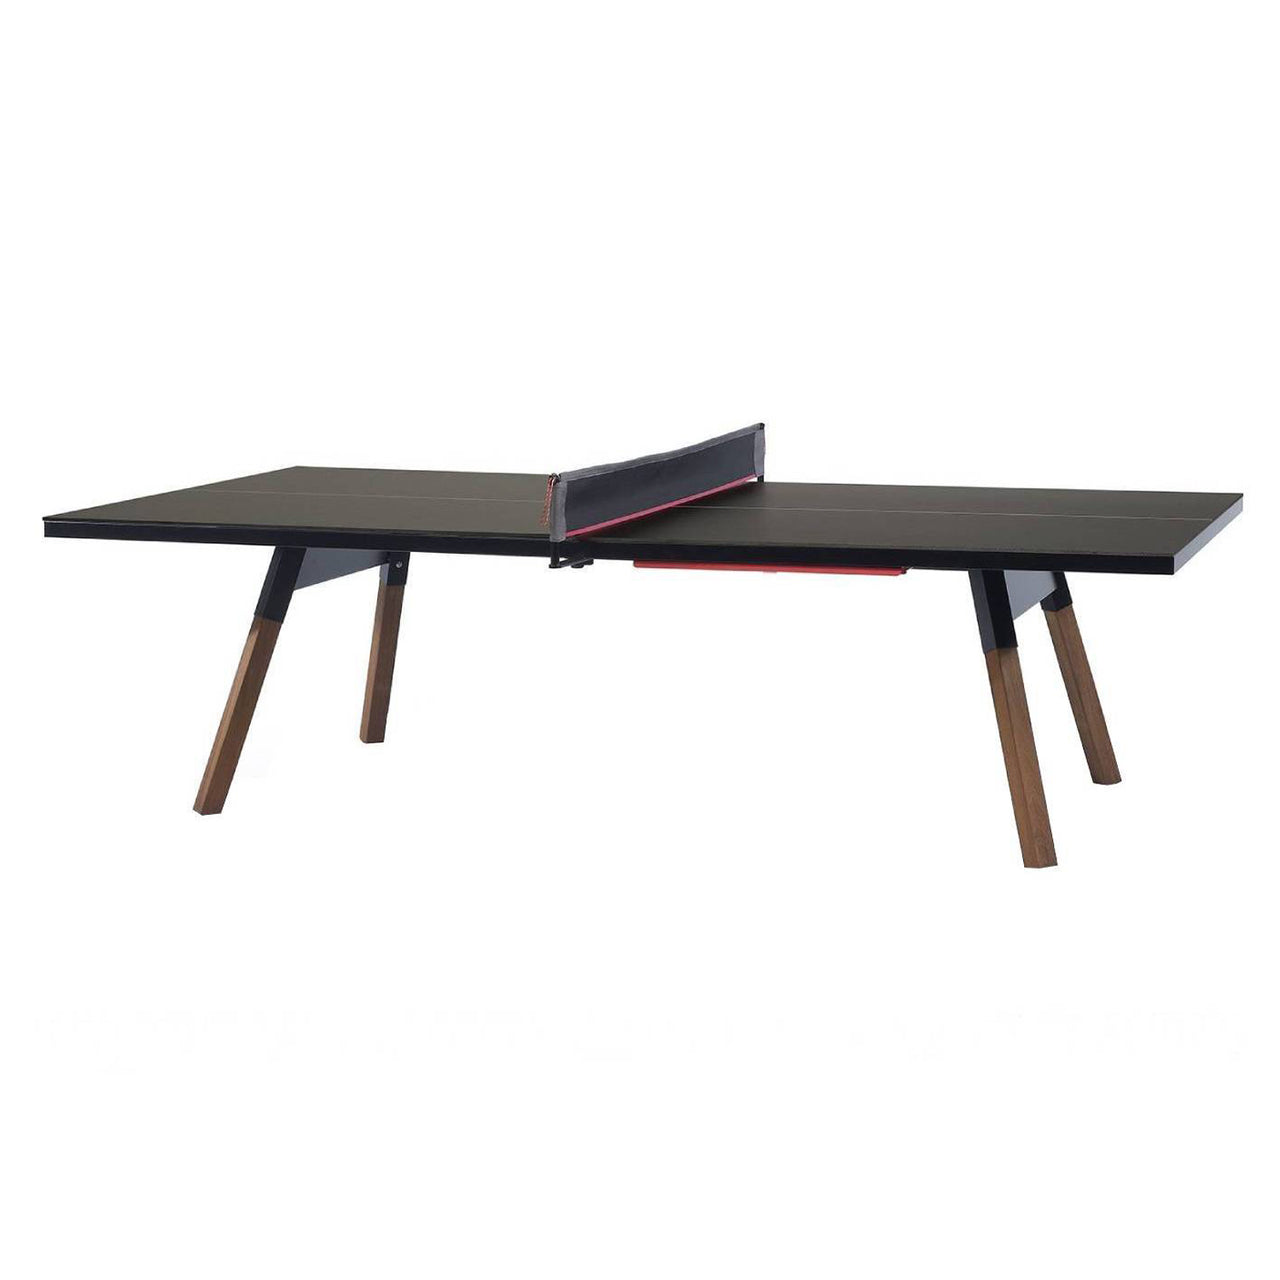 You and Me Ping Pong/Dining/Conference Table: Standard - 107.9